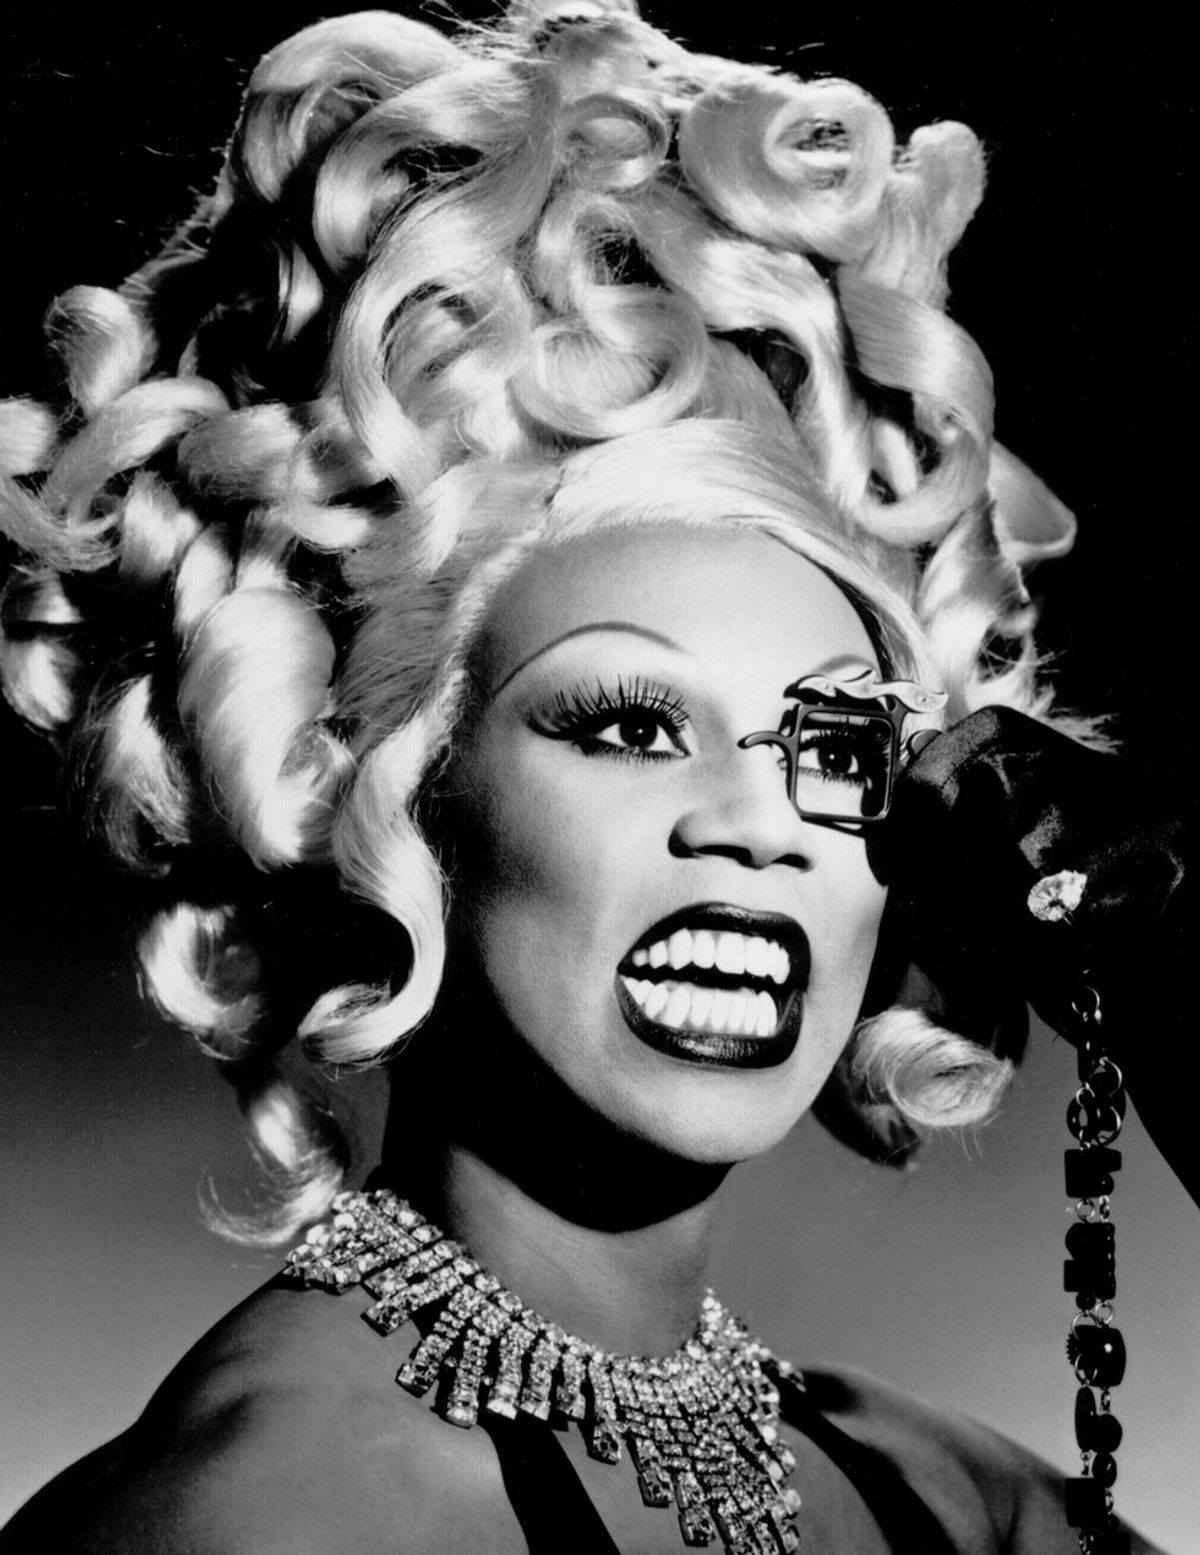 7 Life Lessons I've Learned From Watching RuPaul's 'Drag Race'